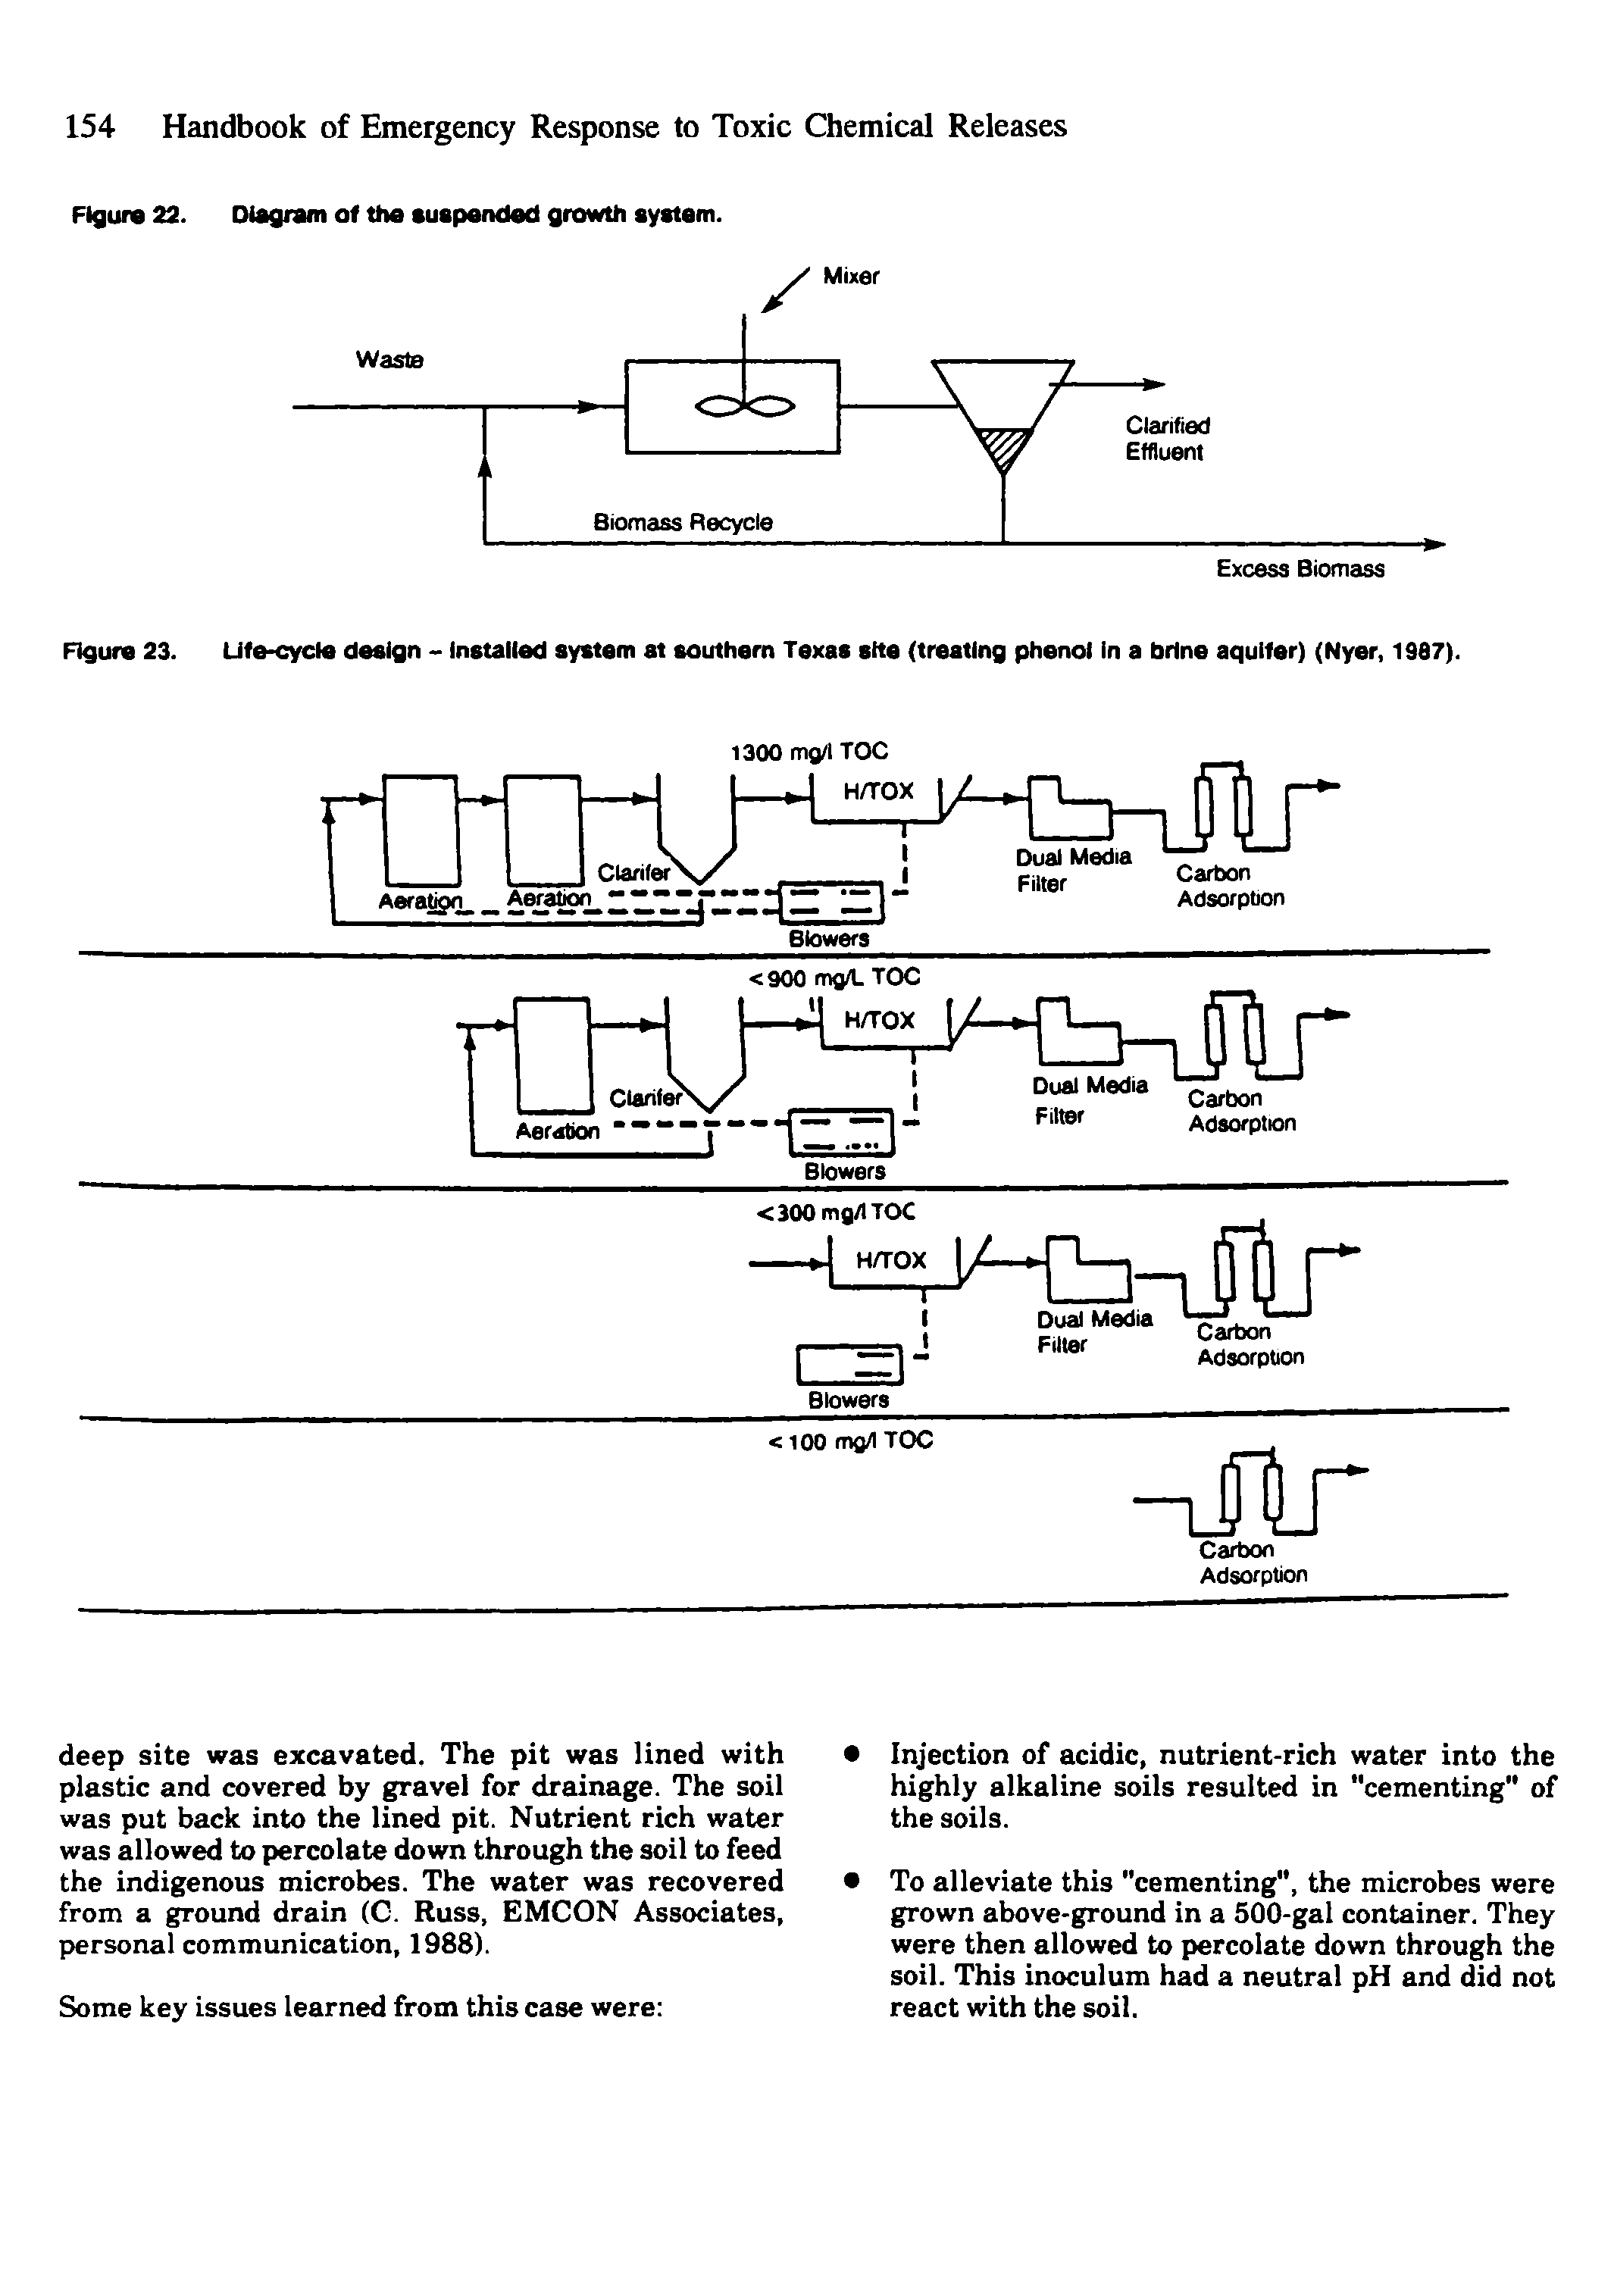 Figure 23. Ufe-cycle design - installed system at southern Texas site (treating phenol in a brine aquifer) (Nyer, 1987).